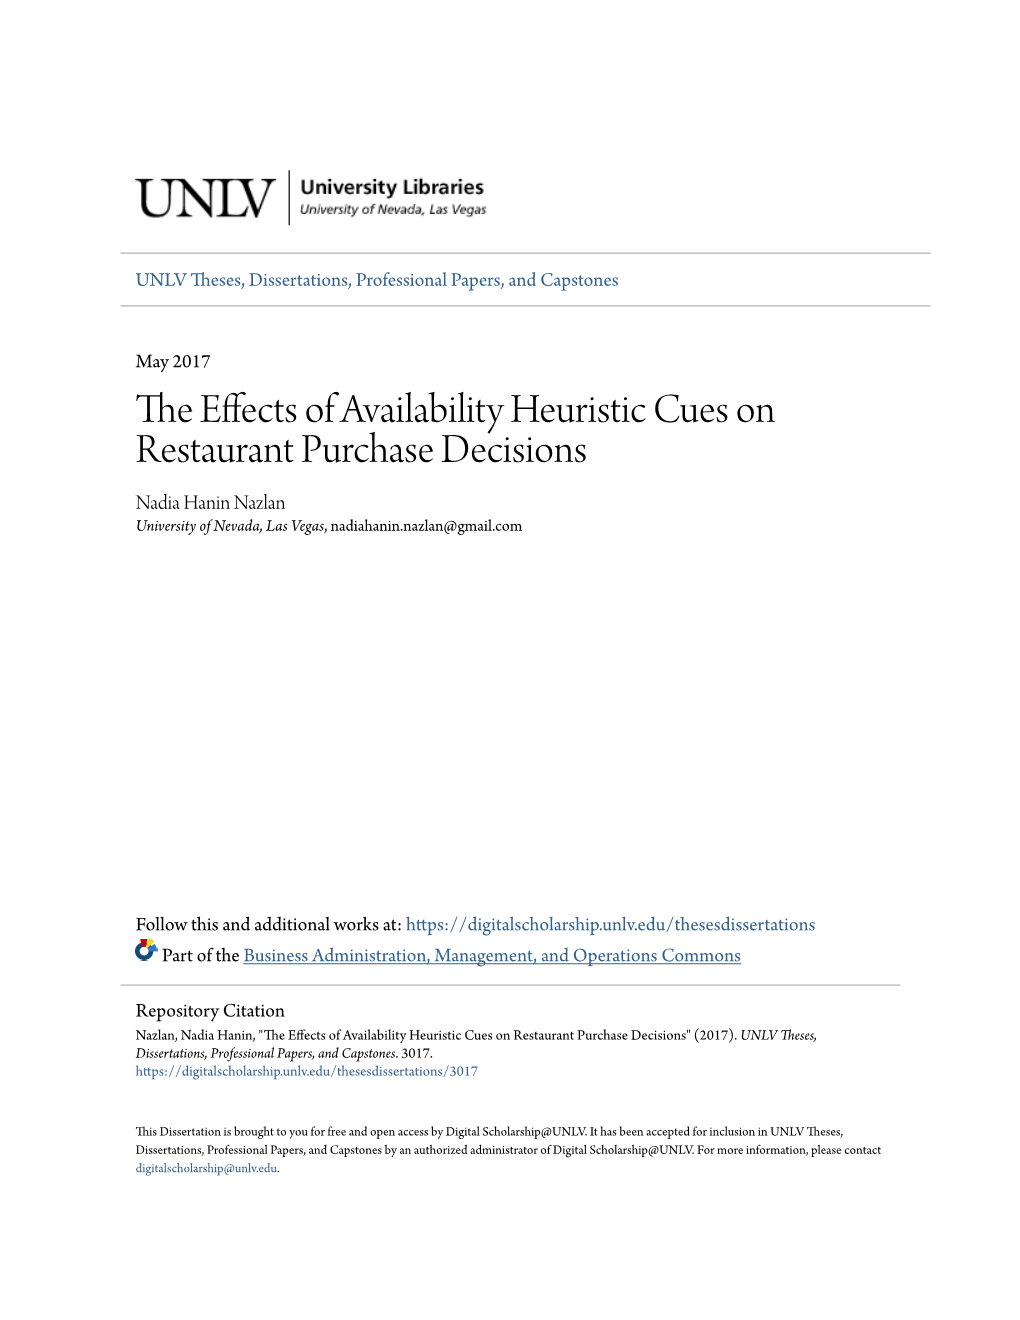 The Effects of Availability Heuristic Cues on Restaurant Purchase Decisions" (2017)